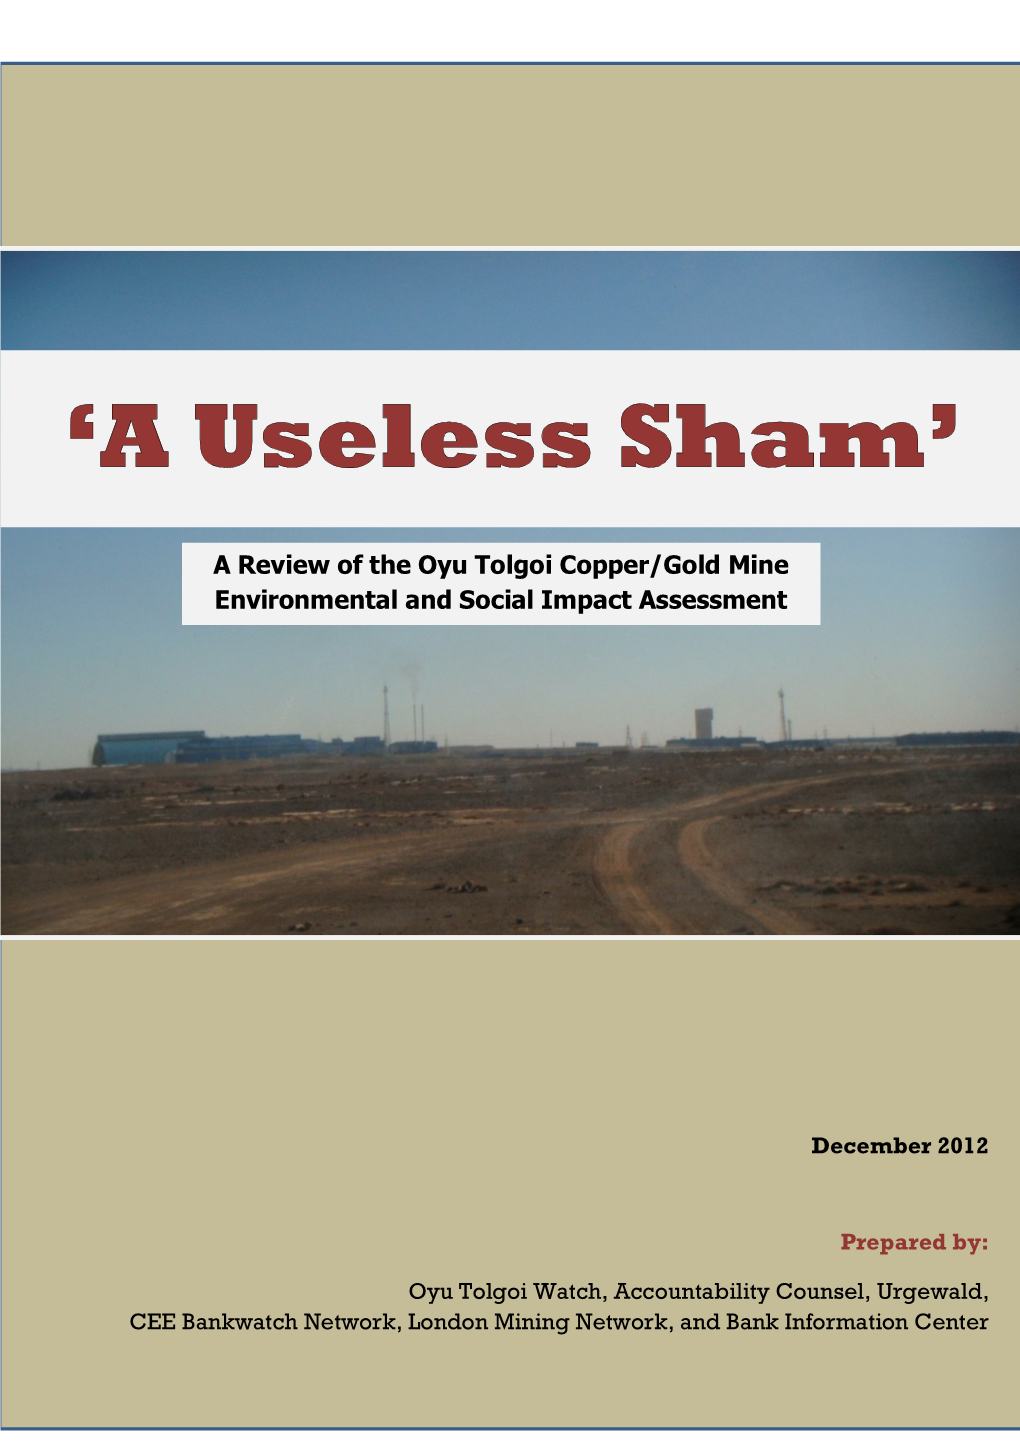 A Review of the Oyu Tolgoi Copper/Gold Mine Environmental and Social Impact Assessment